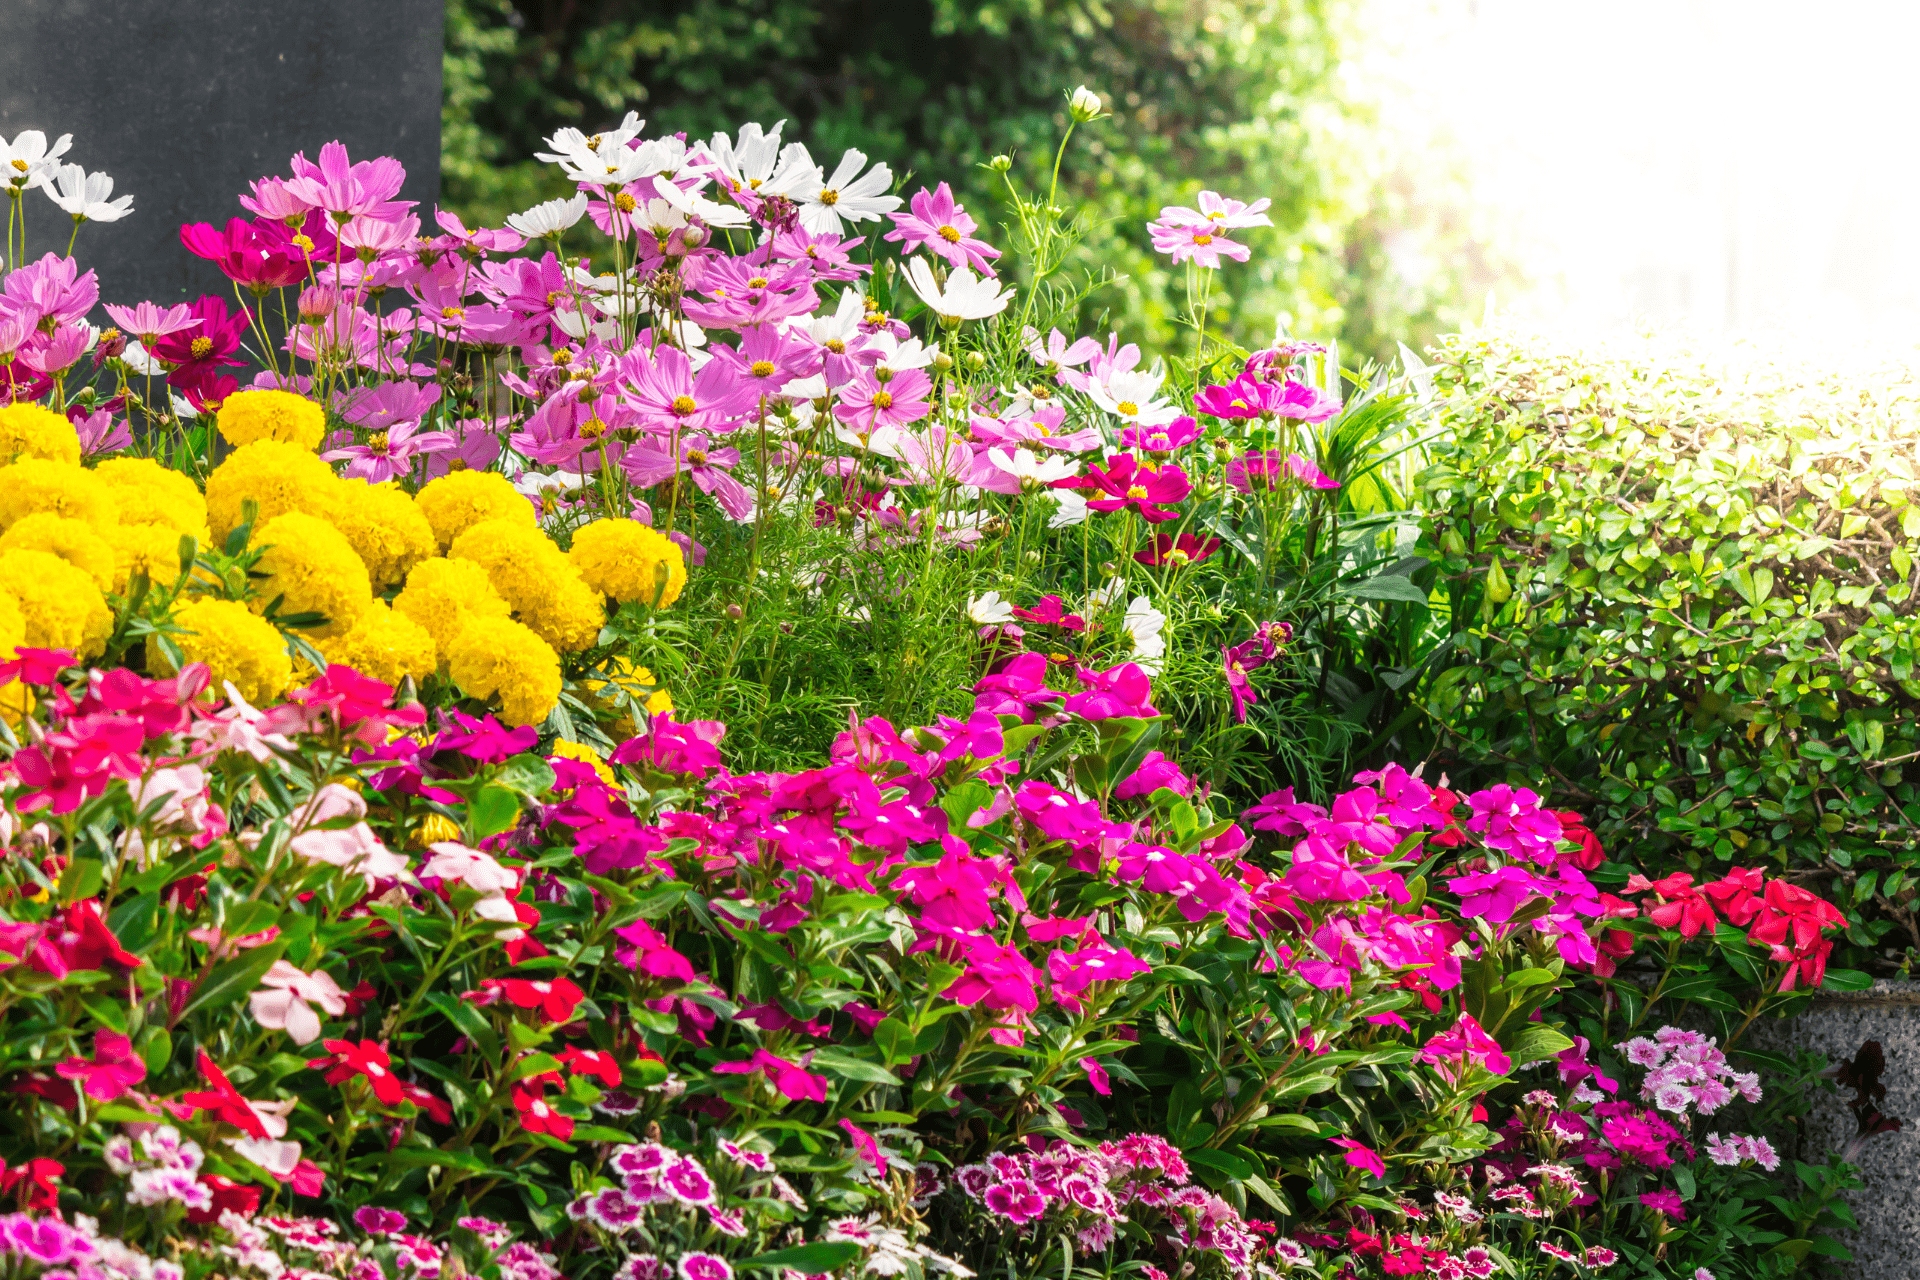 A myriad of different-colored beautiful flowers blooming in a garden in Boise landscaped by Boise Landscaping Company